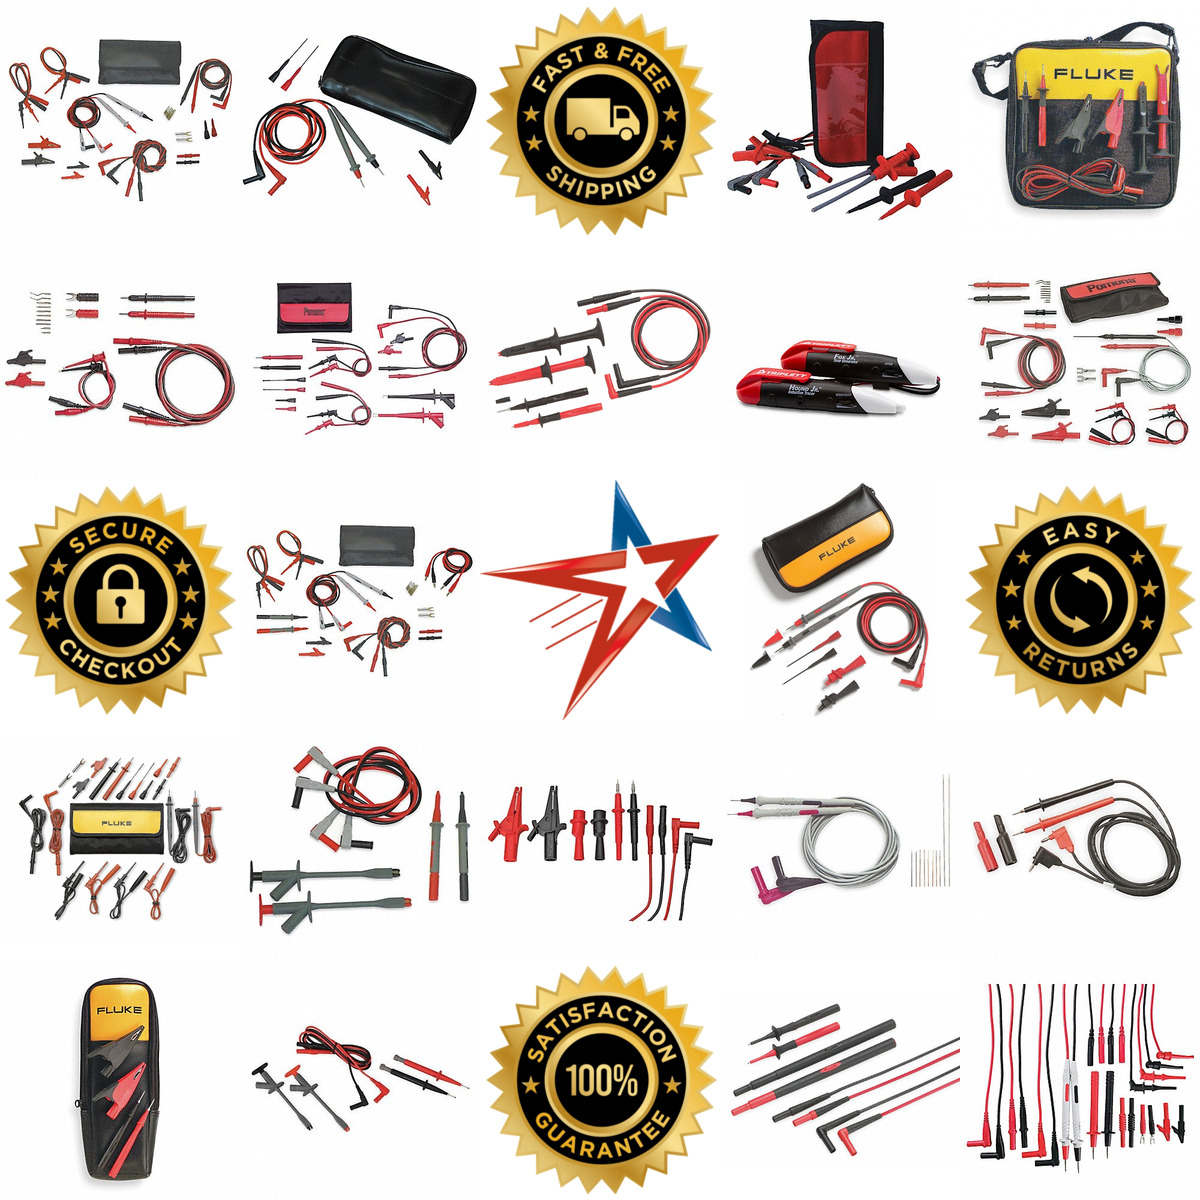 A selection of Test Lead Kits products on GoVets